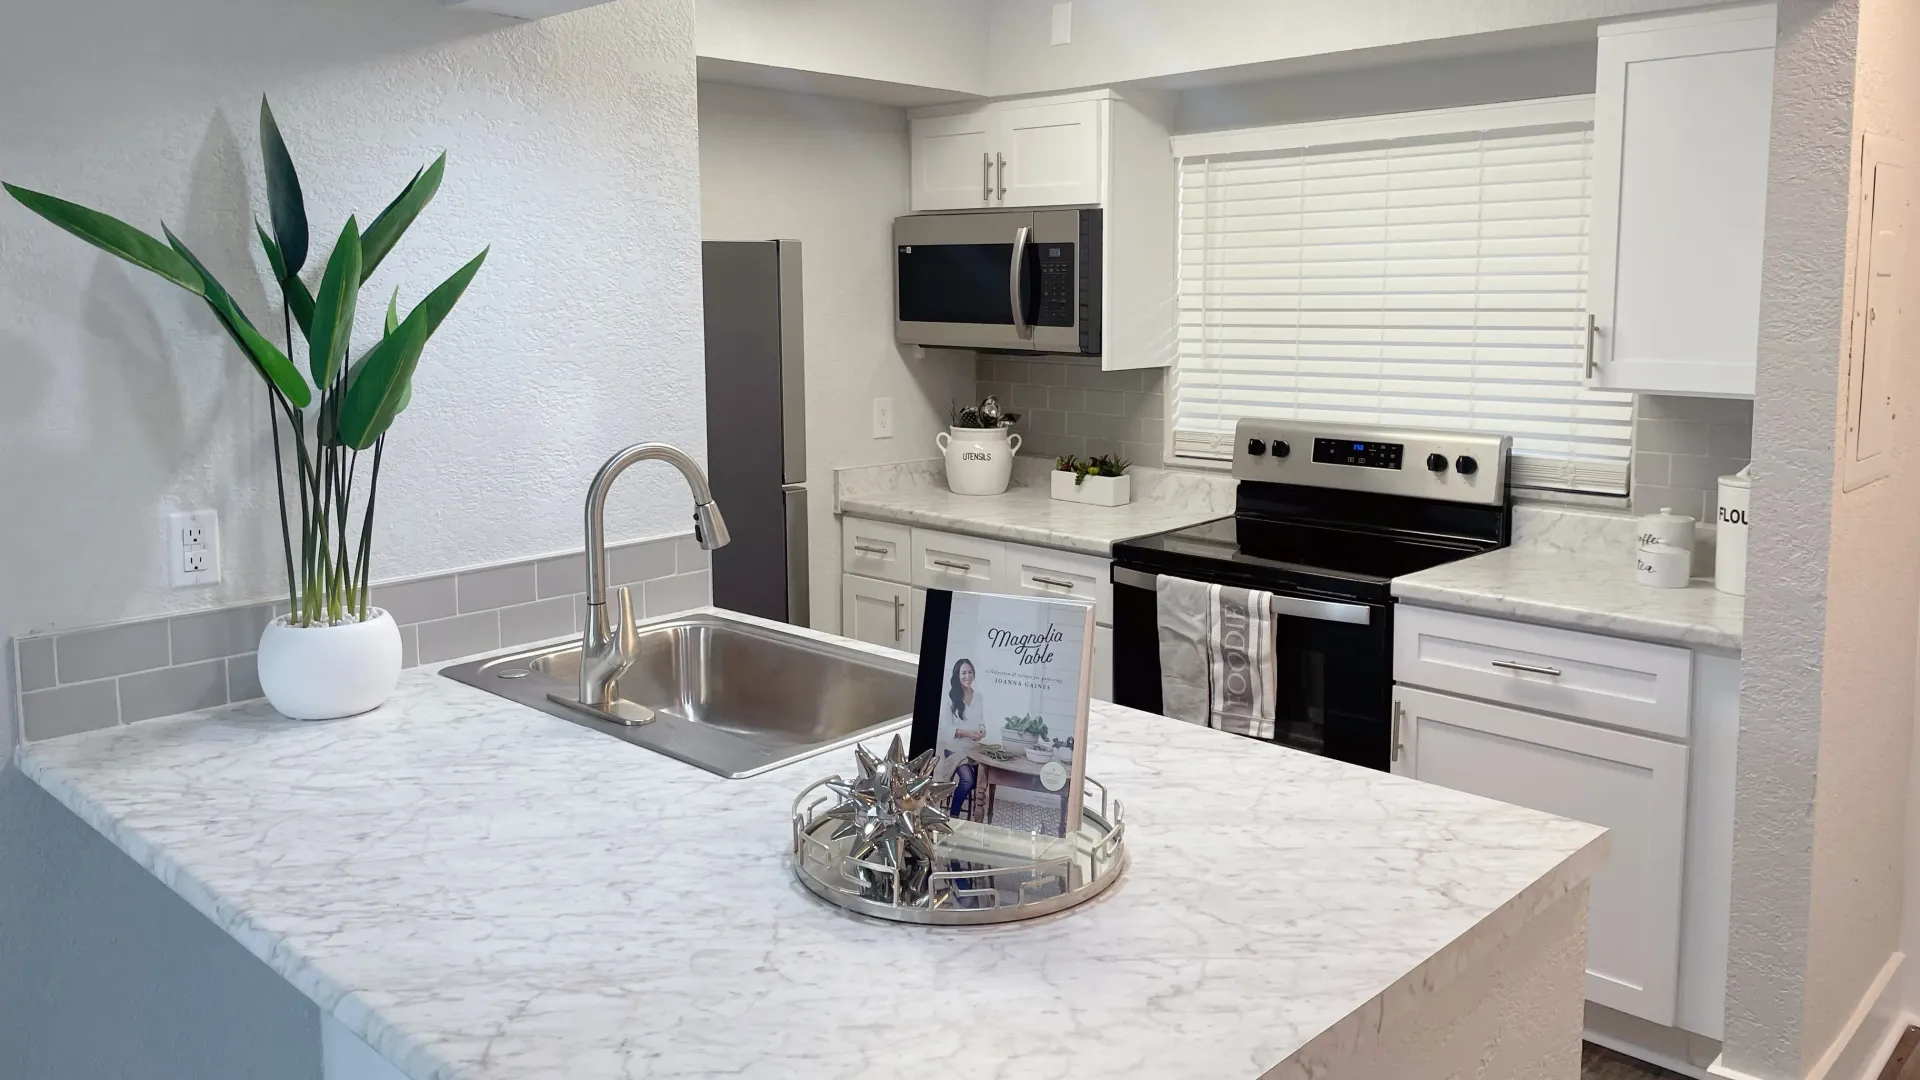 A modern, vibrant kitchen adorned with marble-style countertops and a contemporary grey subway tile backsplash, igniting your culinary creativity.